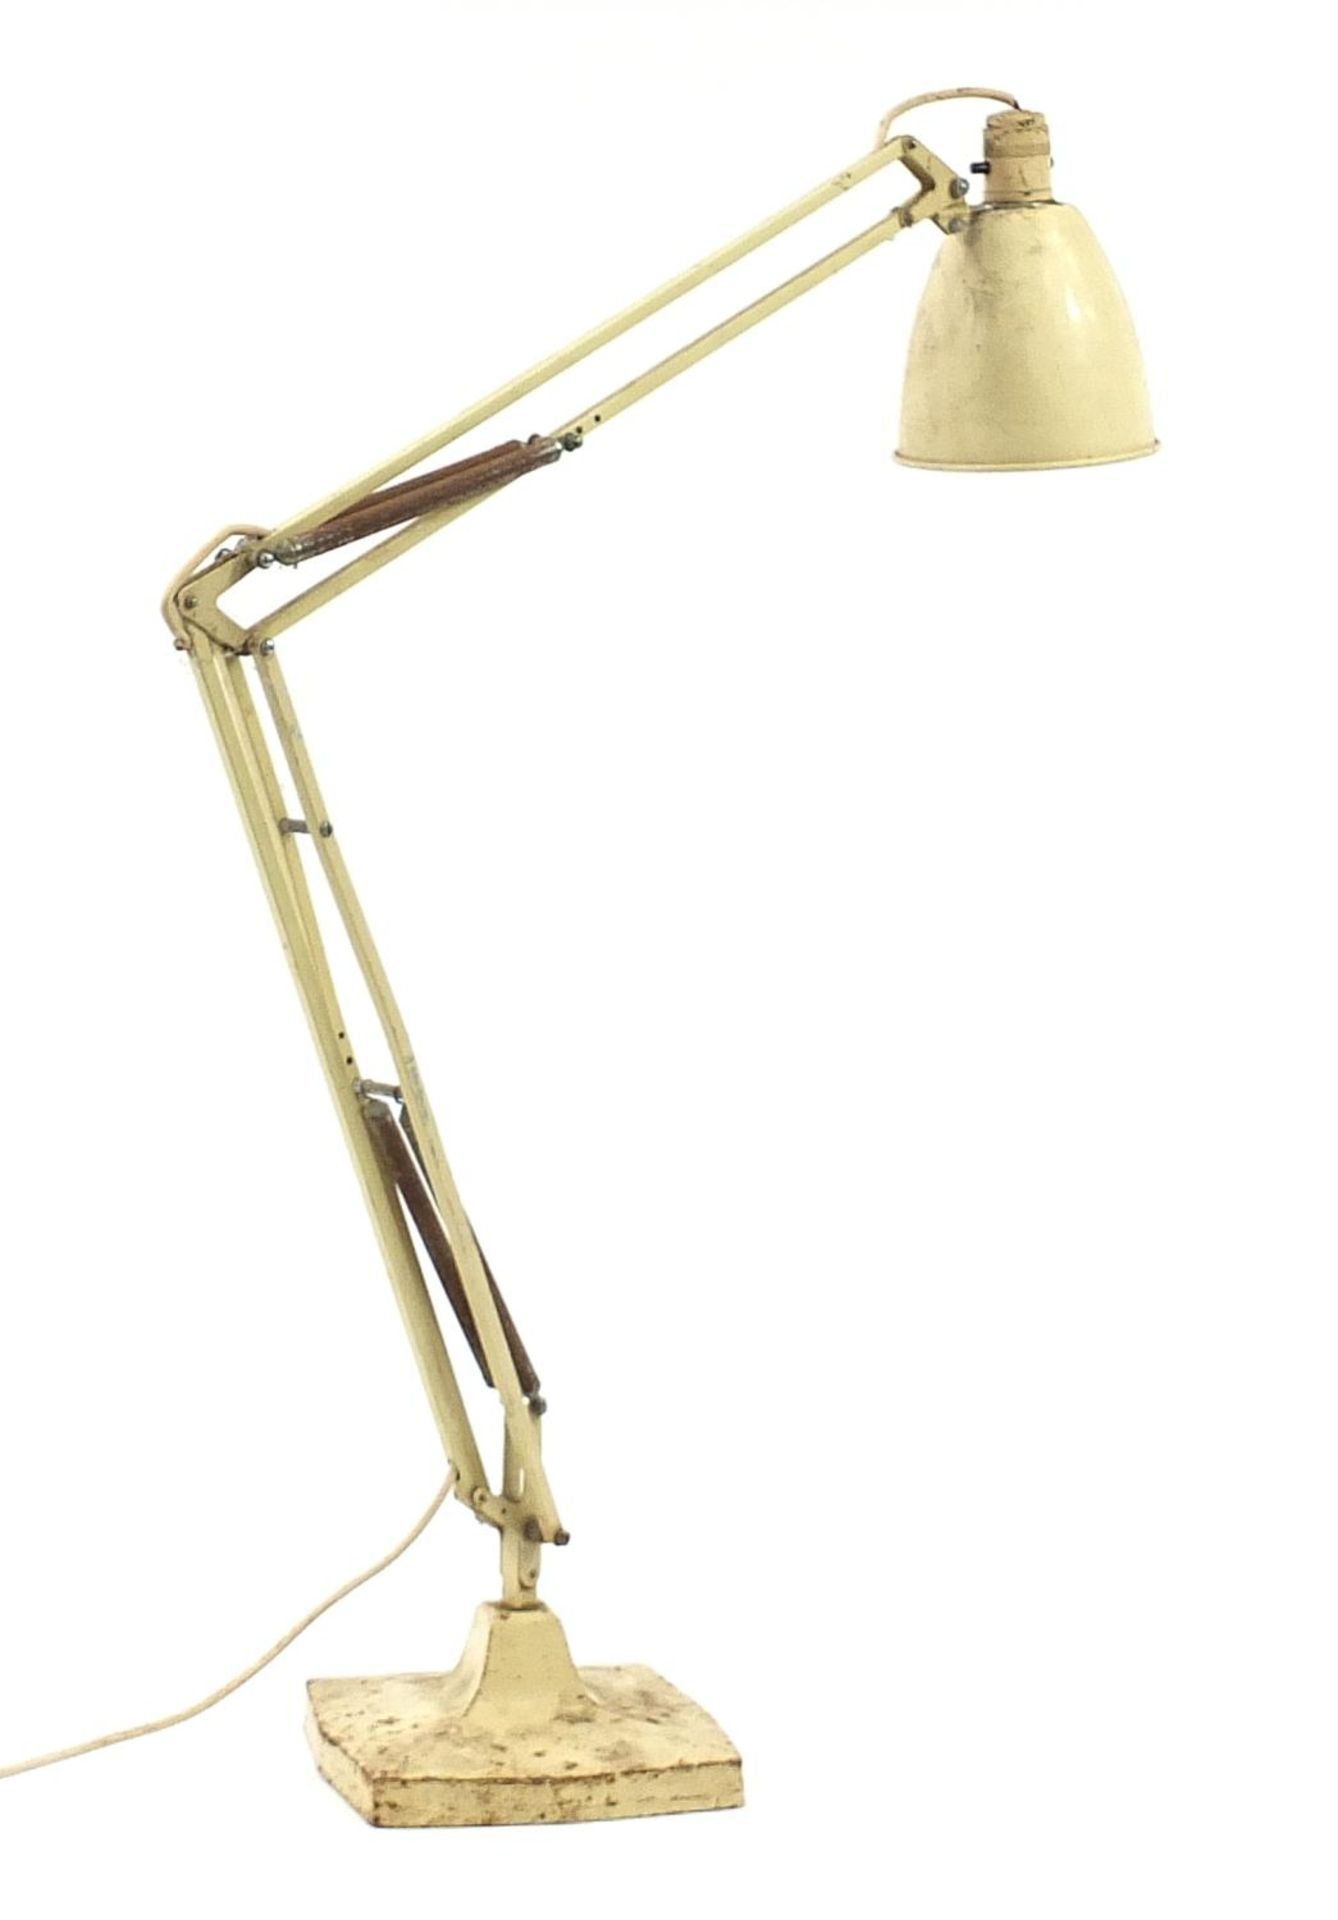 Vintage Herbert Terry Anglepoise lamp :For Further Condition Reports Please Visit Our Website, - Image 2 of 4